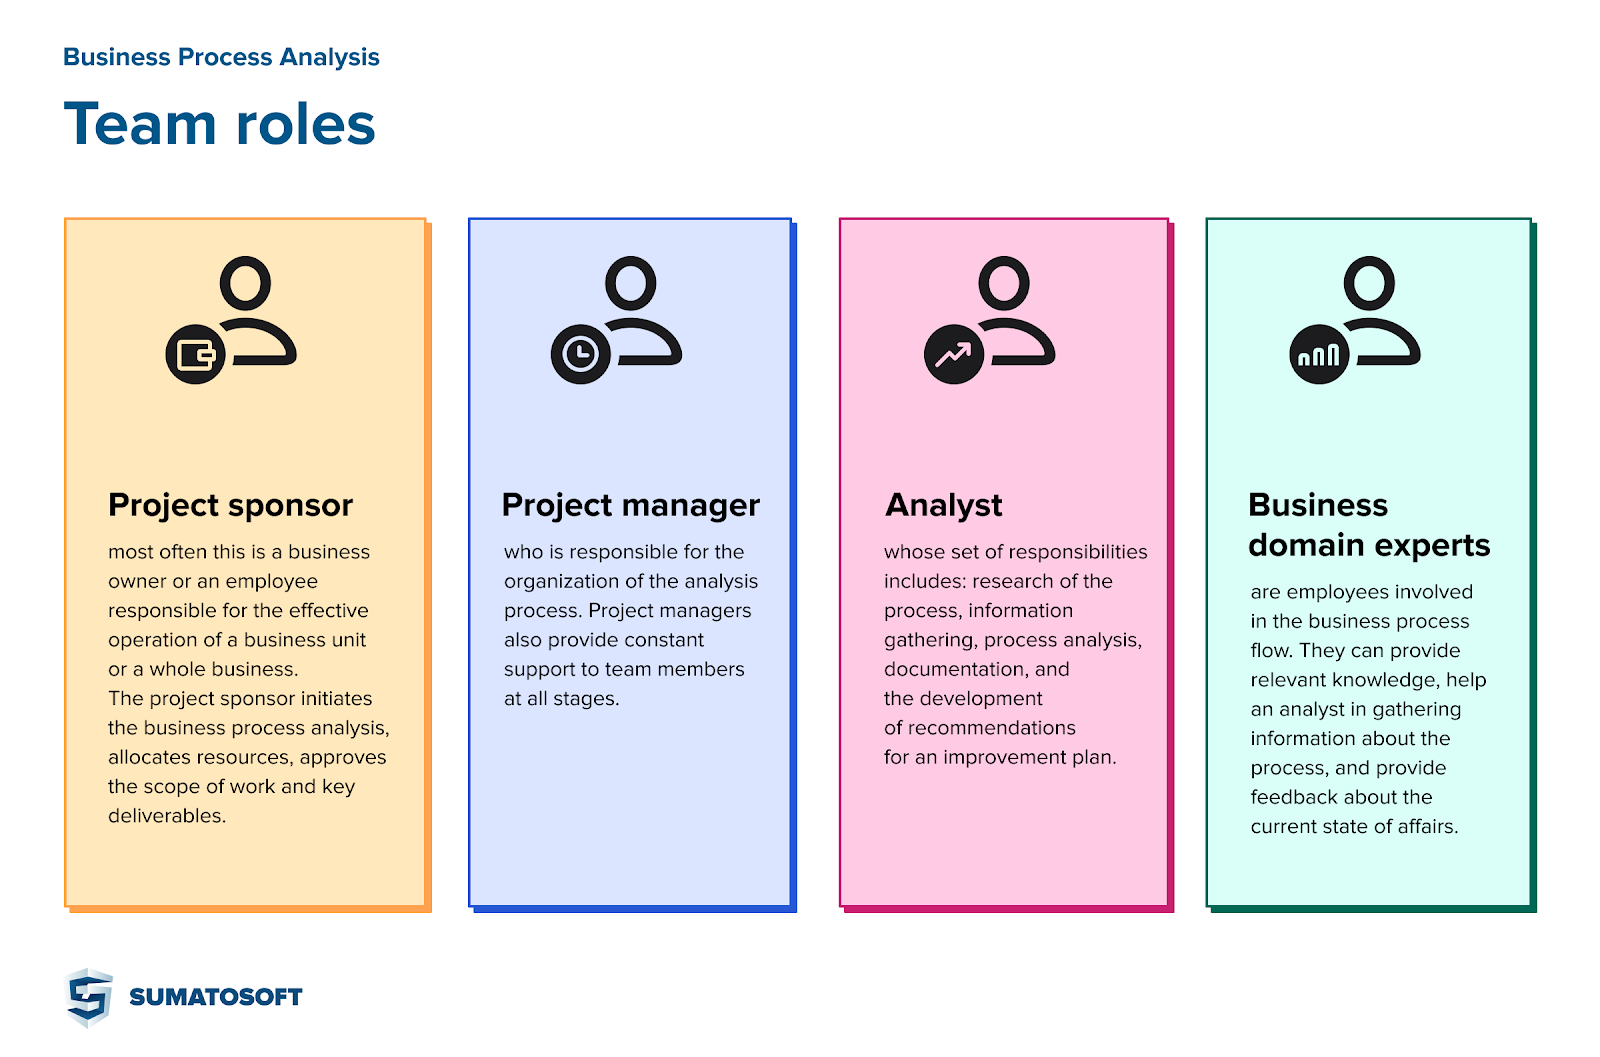 business Process Analysis - team roles